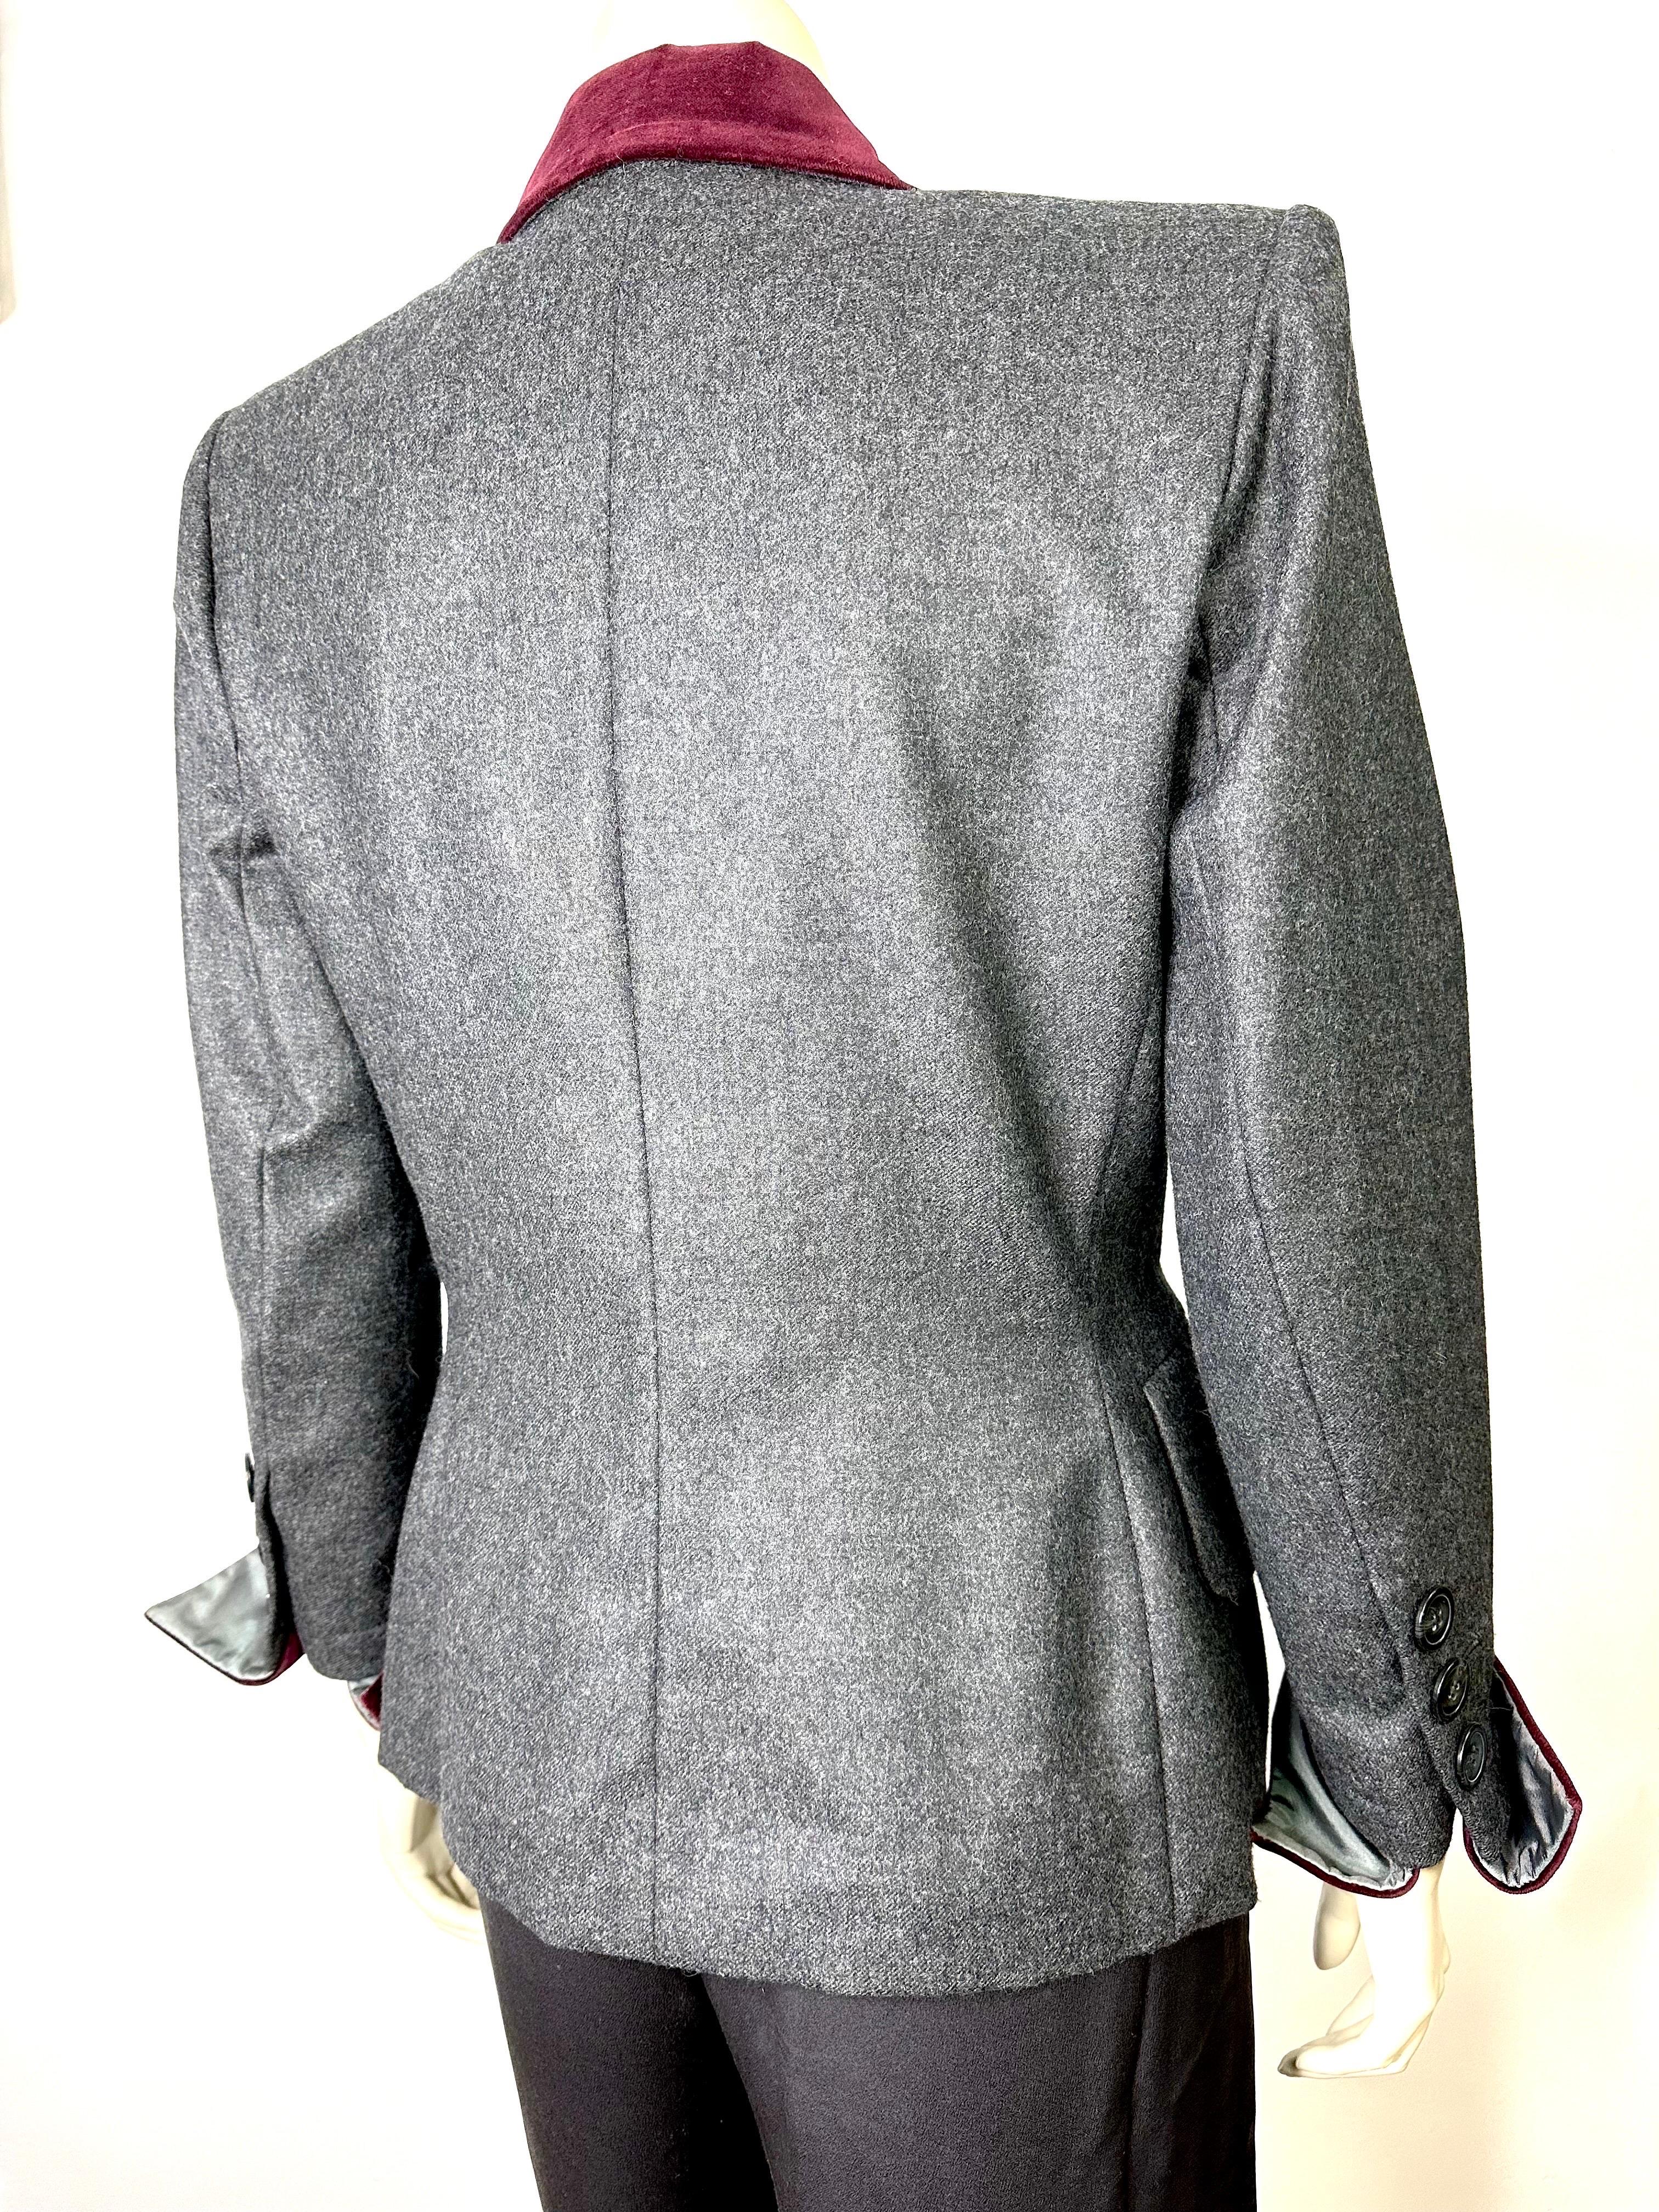 Vintage Yves saint Laurent grey wool blazer from 1990 For Sale 2